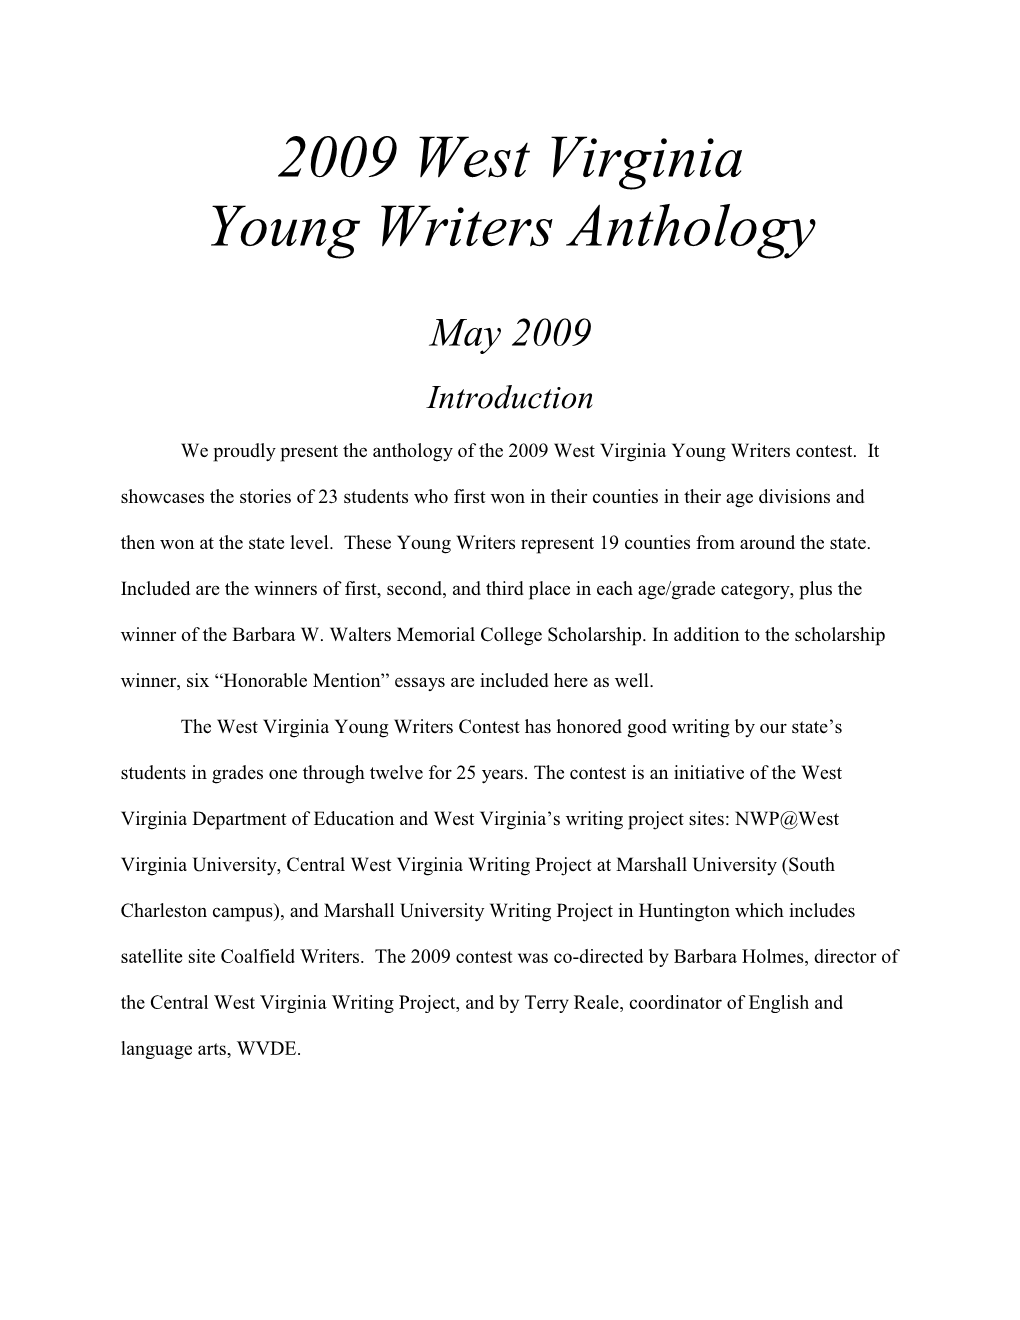 2009 West Virginia Young Writers Anthology